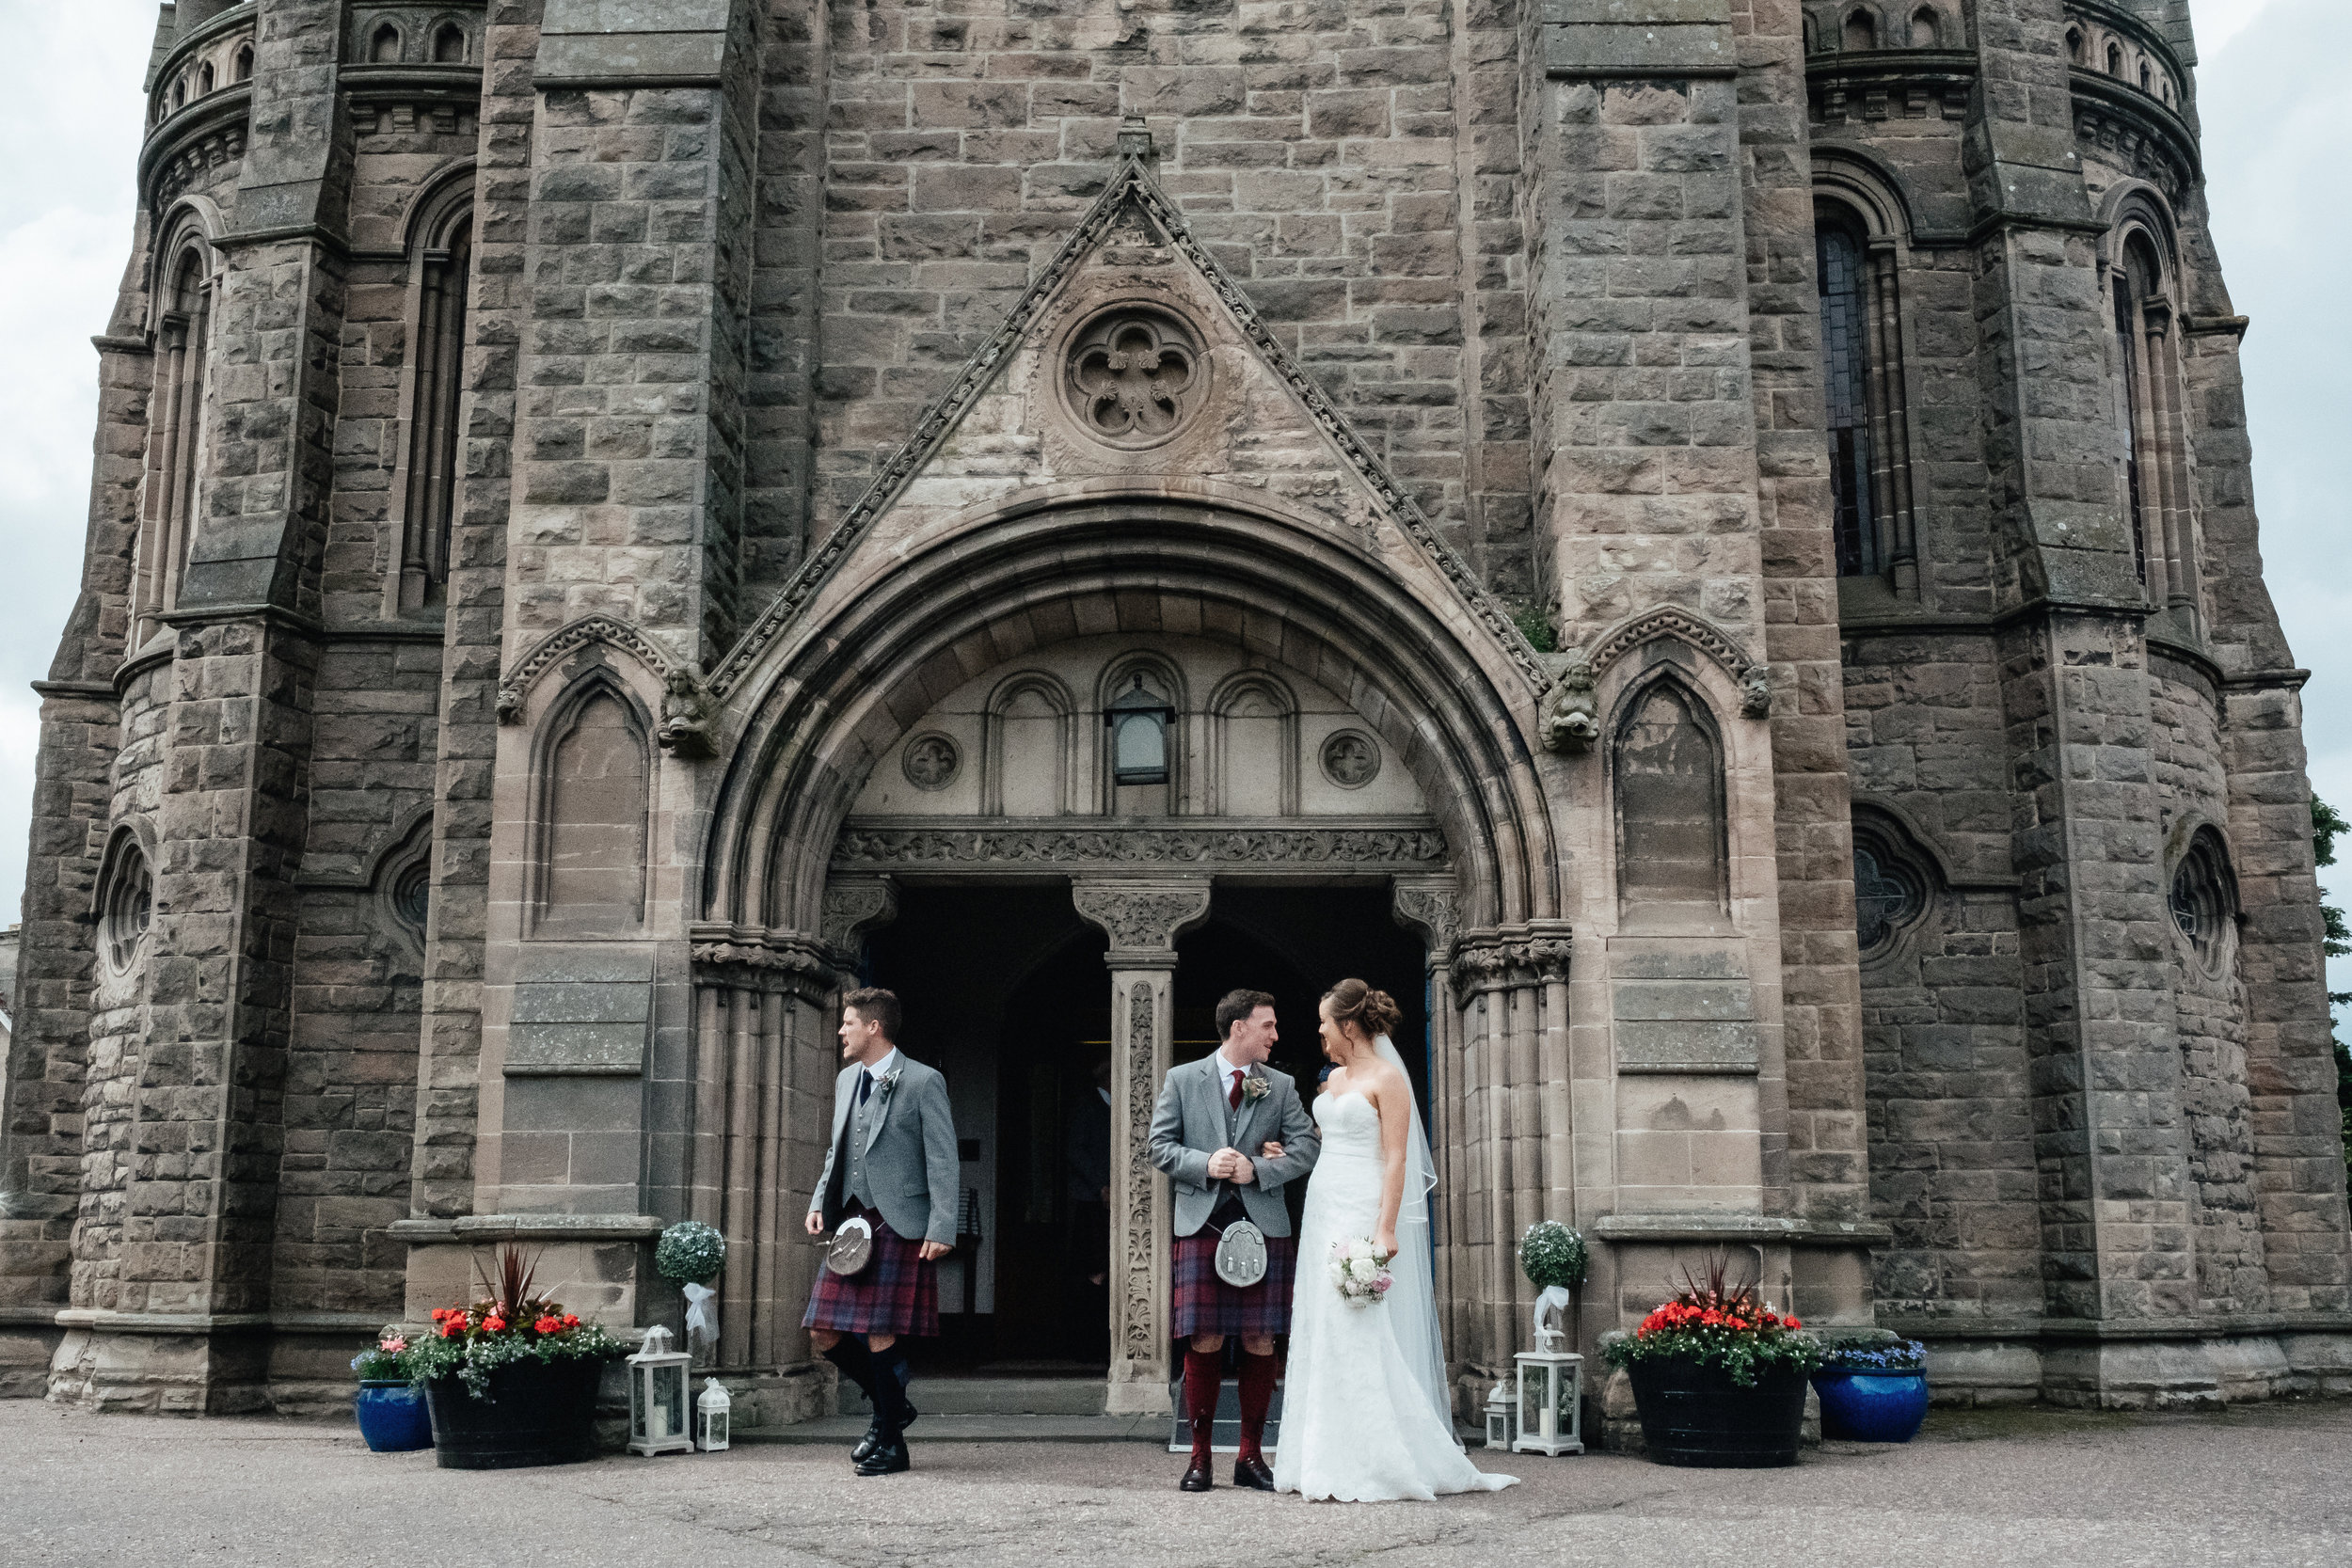 Bride and groom standing outside church